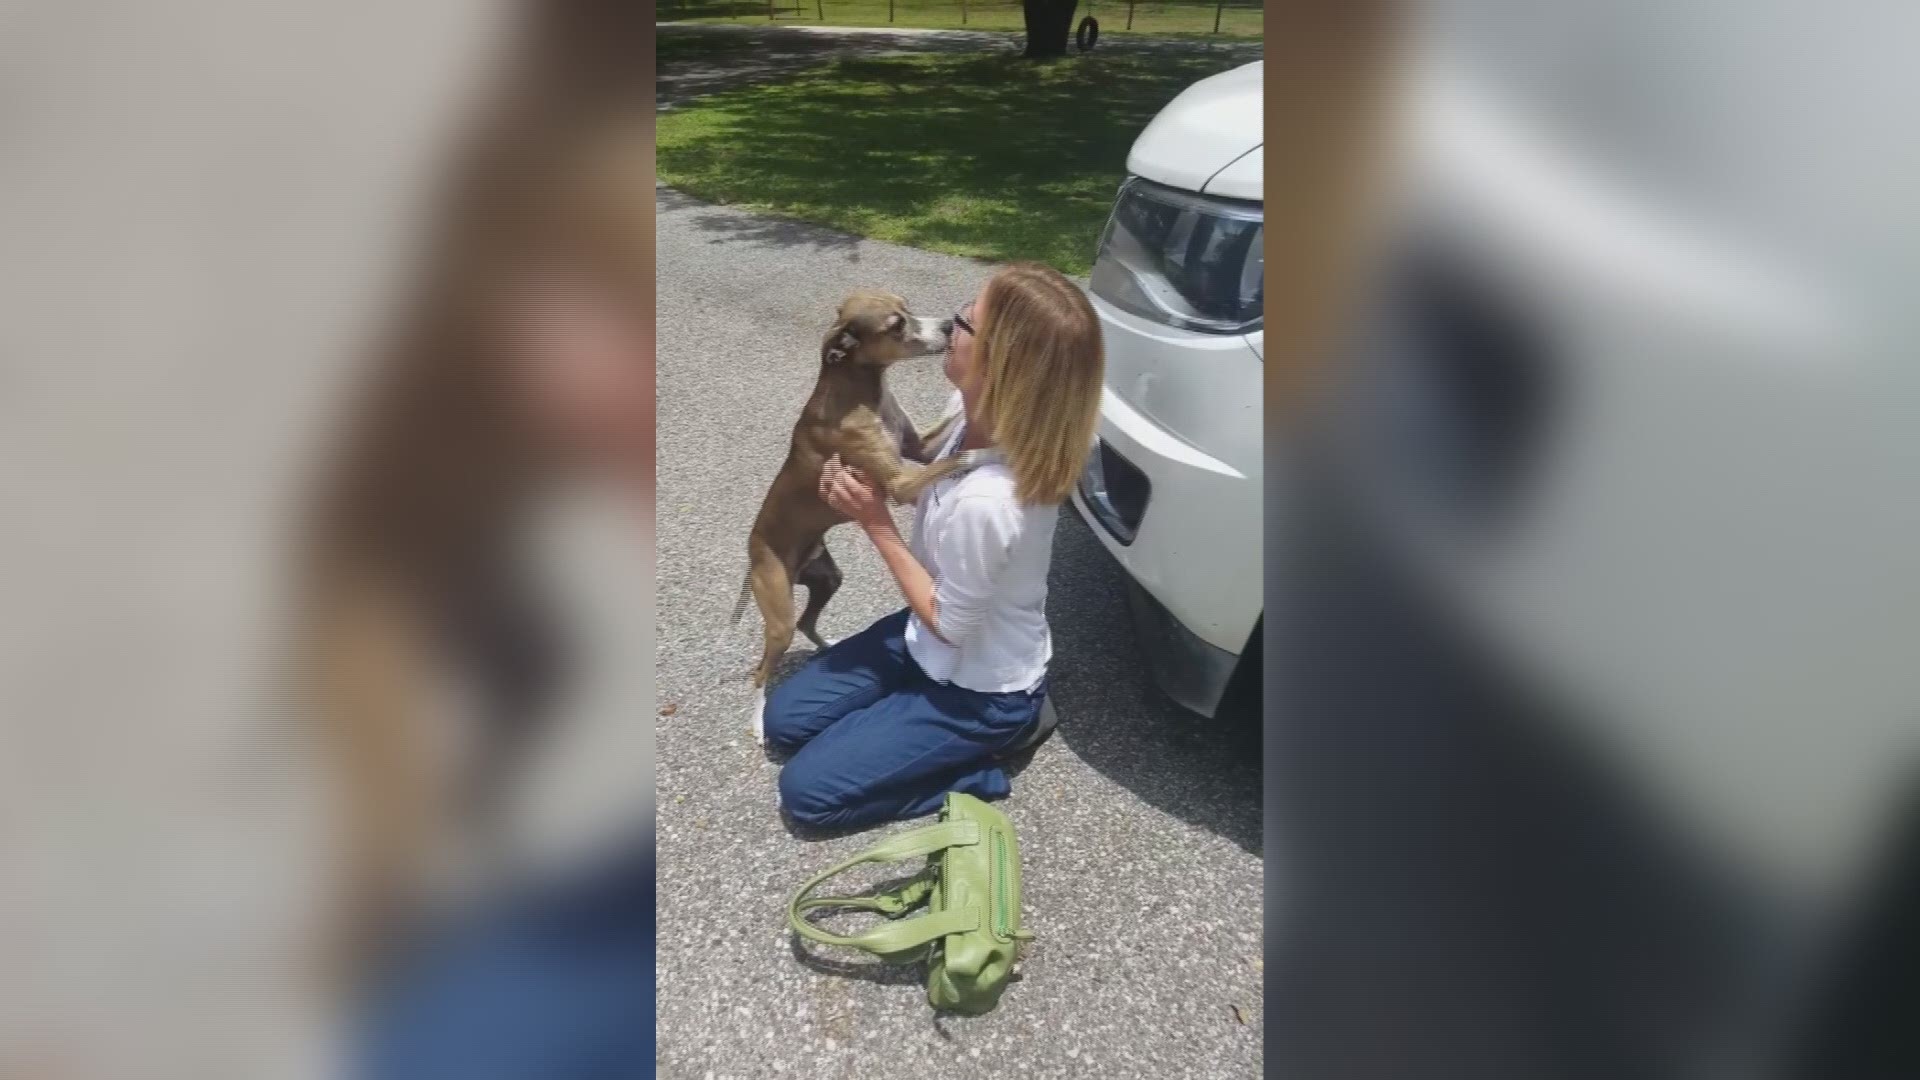 Wherever Otis has been, he's probably just happy to be home right now.

The 8-year-old Italian Greyhound mix was reunited with his family Monday after being missing for almost two weeks. Otis' family left their Bradenton home for vacation during the Fourth of July and while he was being pet sitted, loud fireworks sent him running away in fear.